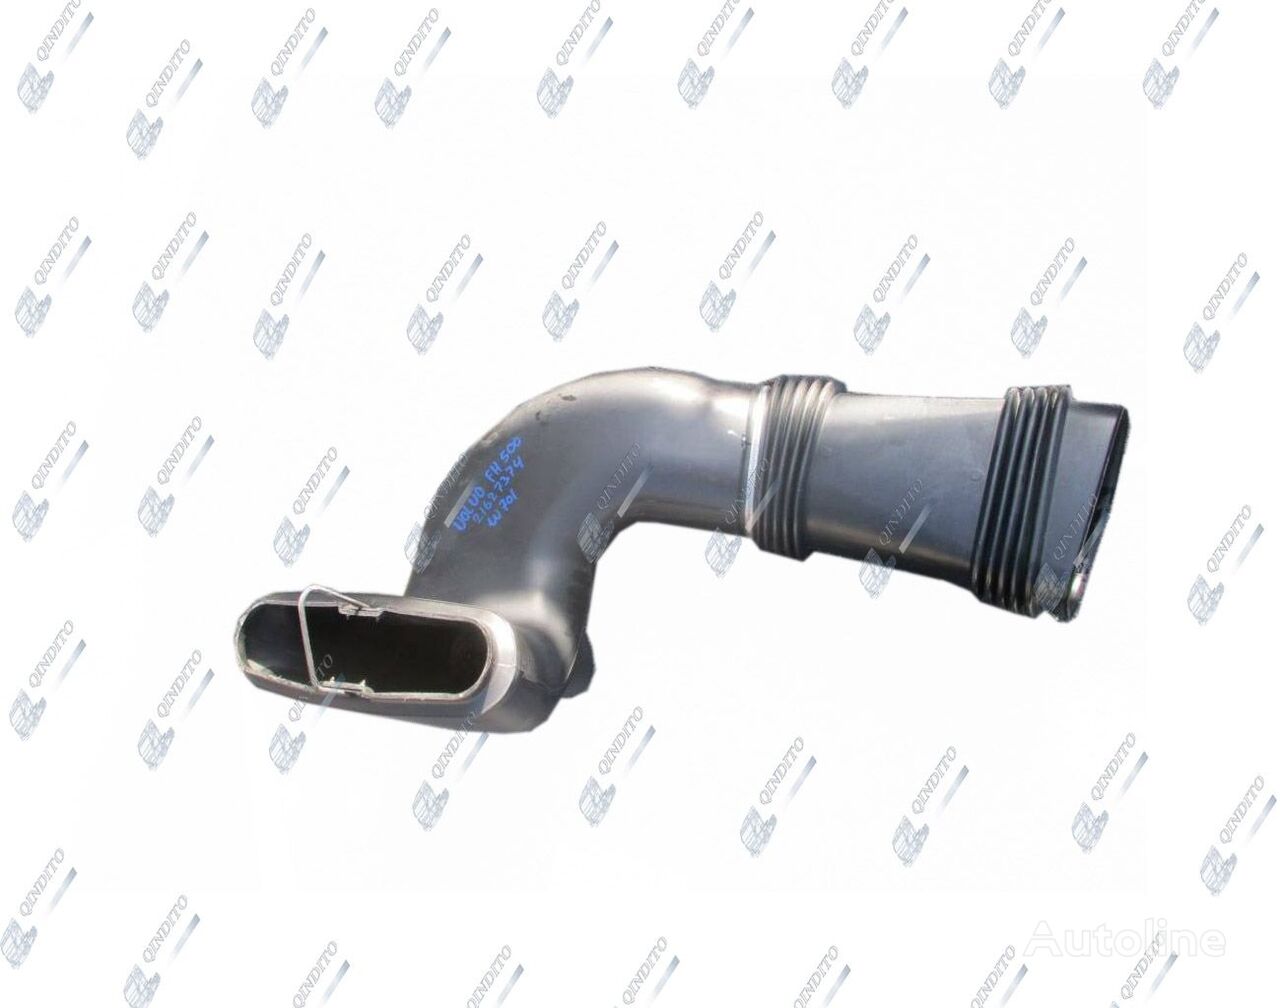 Volvo 21627374 air intake hose for Volvo FH4 E6  truck tractor